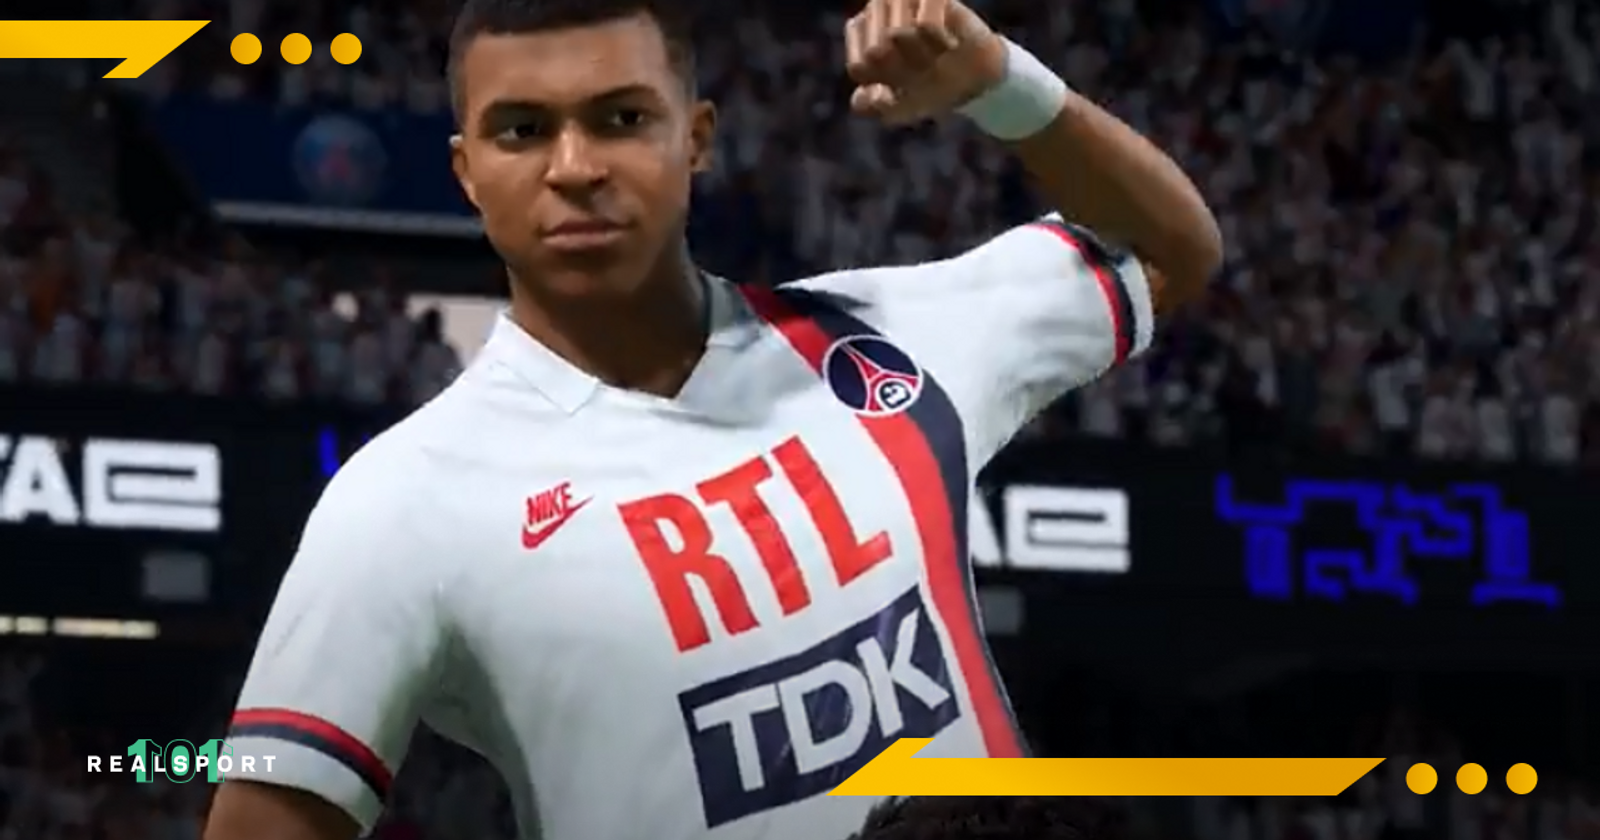 FIFA 22 GAMEPLAY OLD GEN (PS4/PC/XONE) - MANCHESTER CITY X REAL MADRID -  VALE A PENA COMPRAR? 